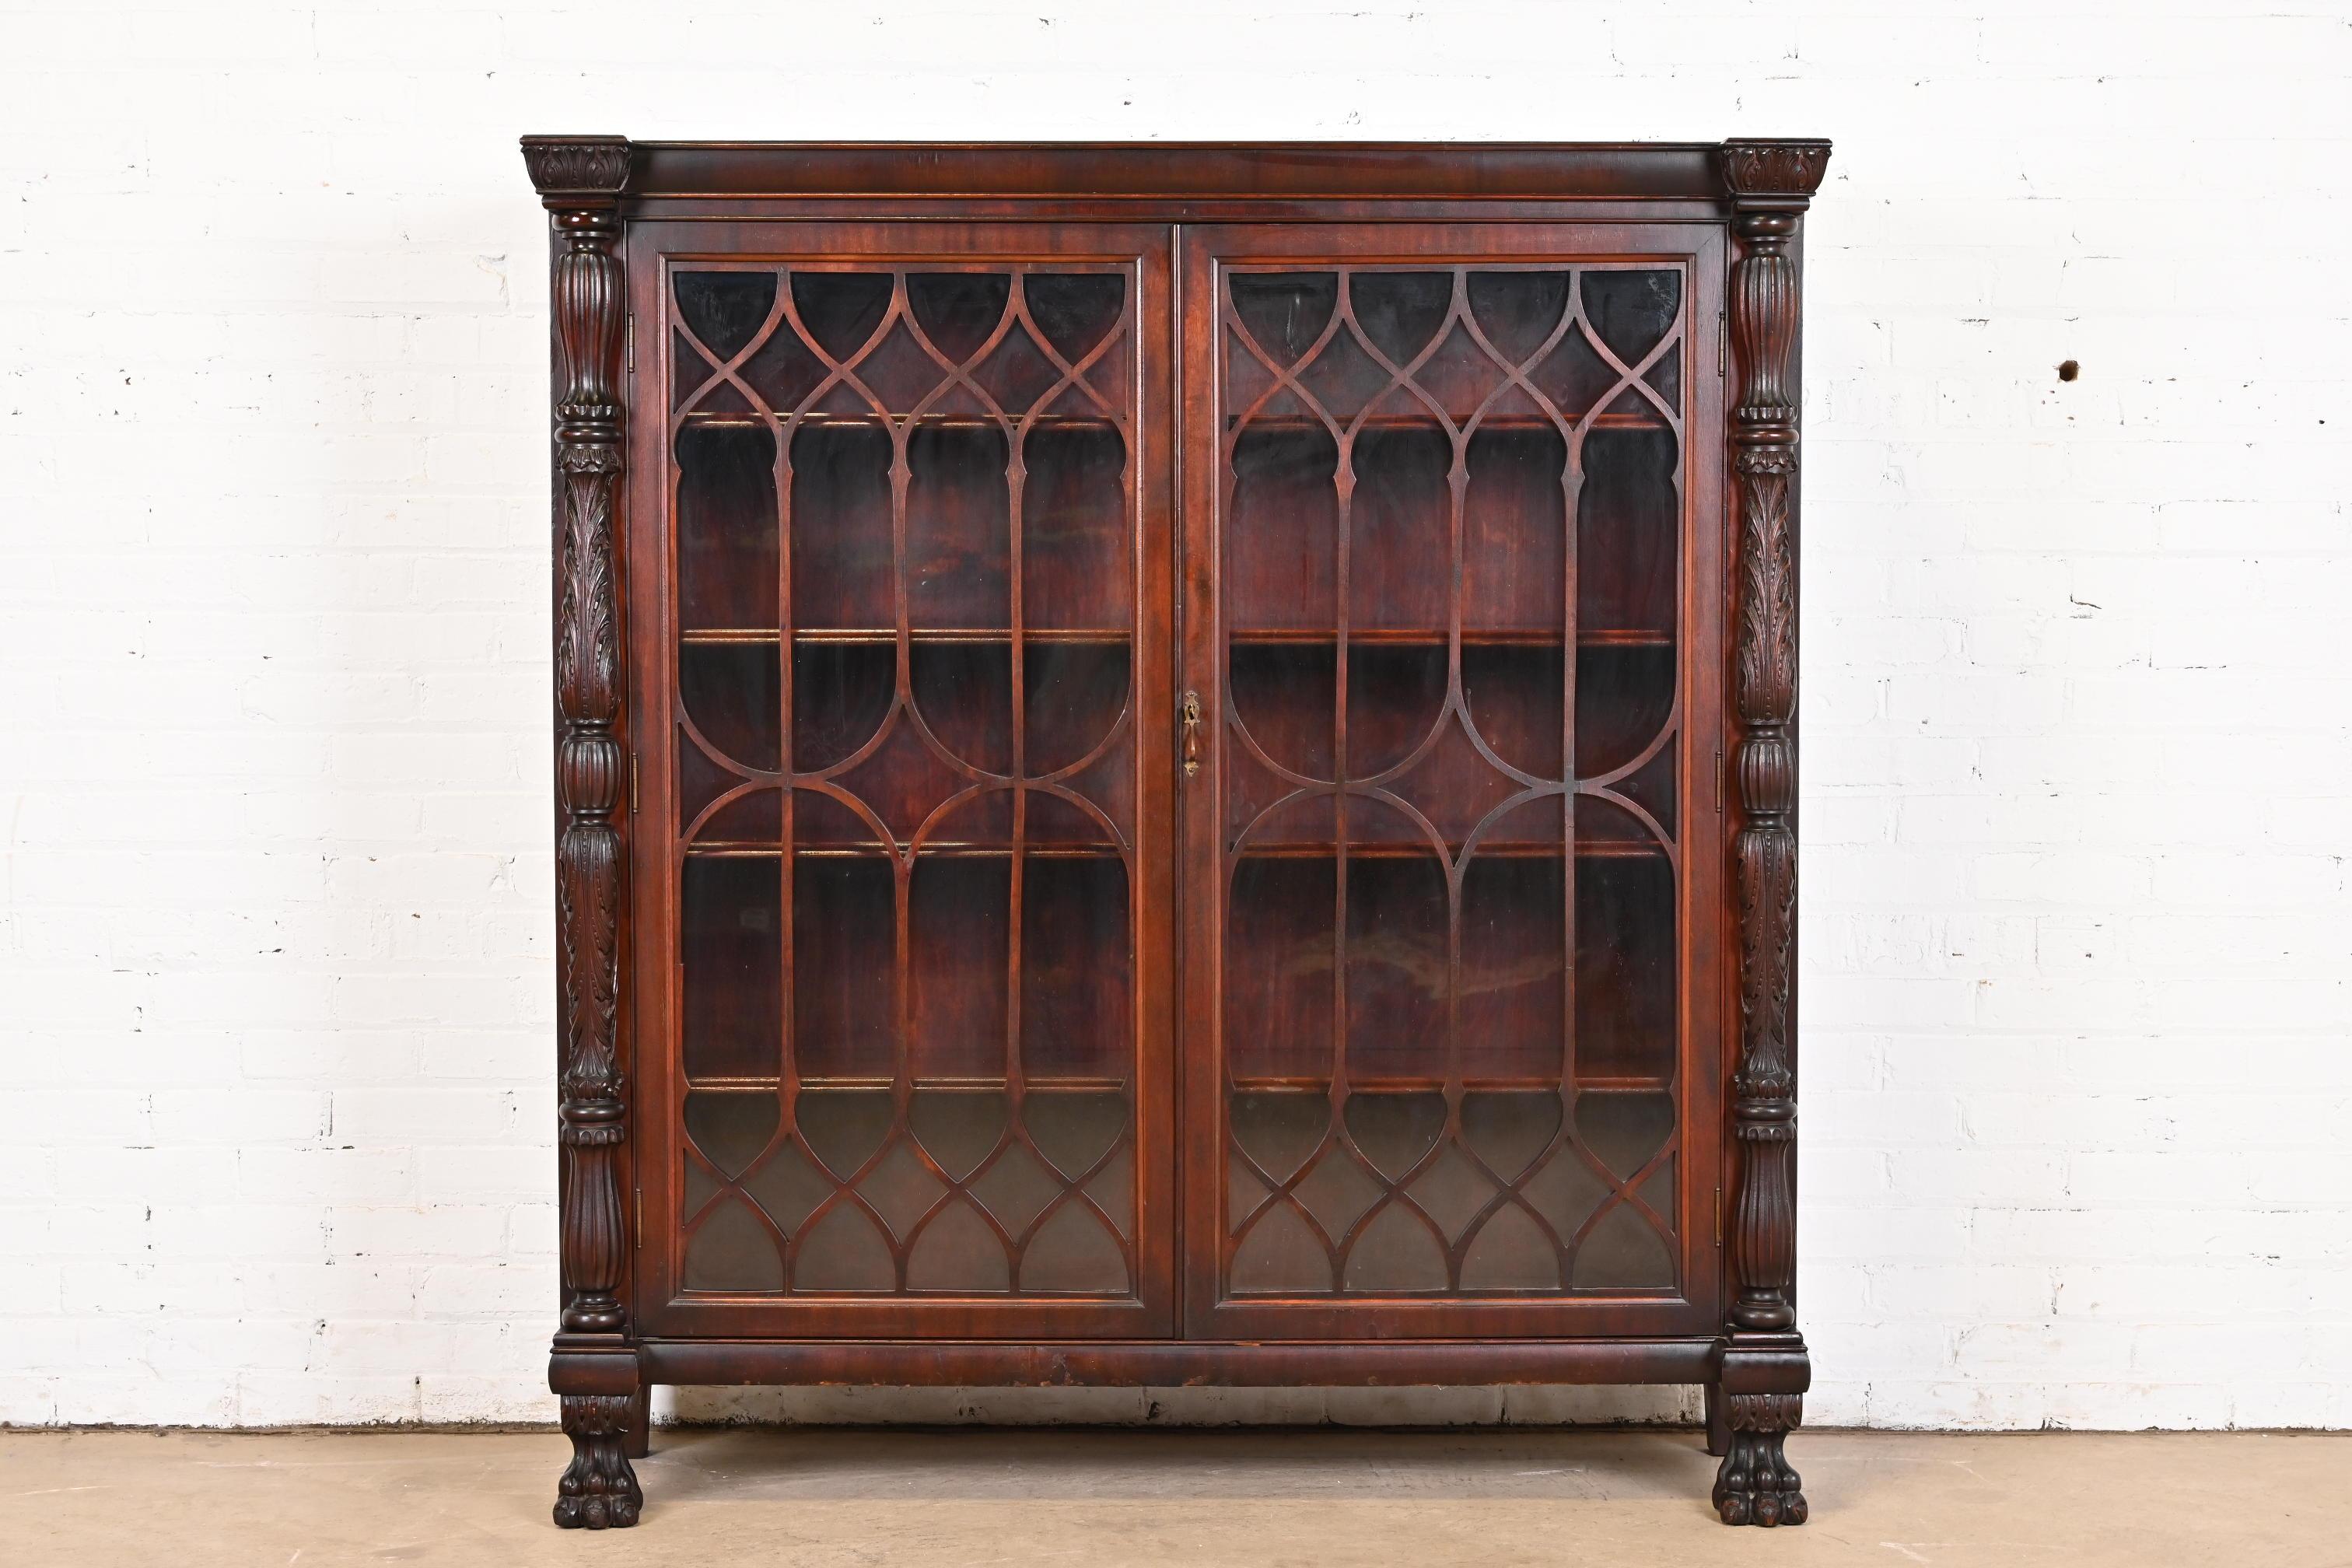 A beautiful antique American Empire or Victorian glass front bookcase with carved lion paw feet

In the manner of R.J. Horner

USA, Circa 1880s

Carved mahogany, with mullioned glass front doors, and original brass hardware. Cabinet locks, and key